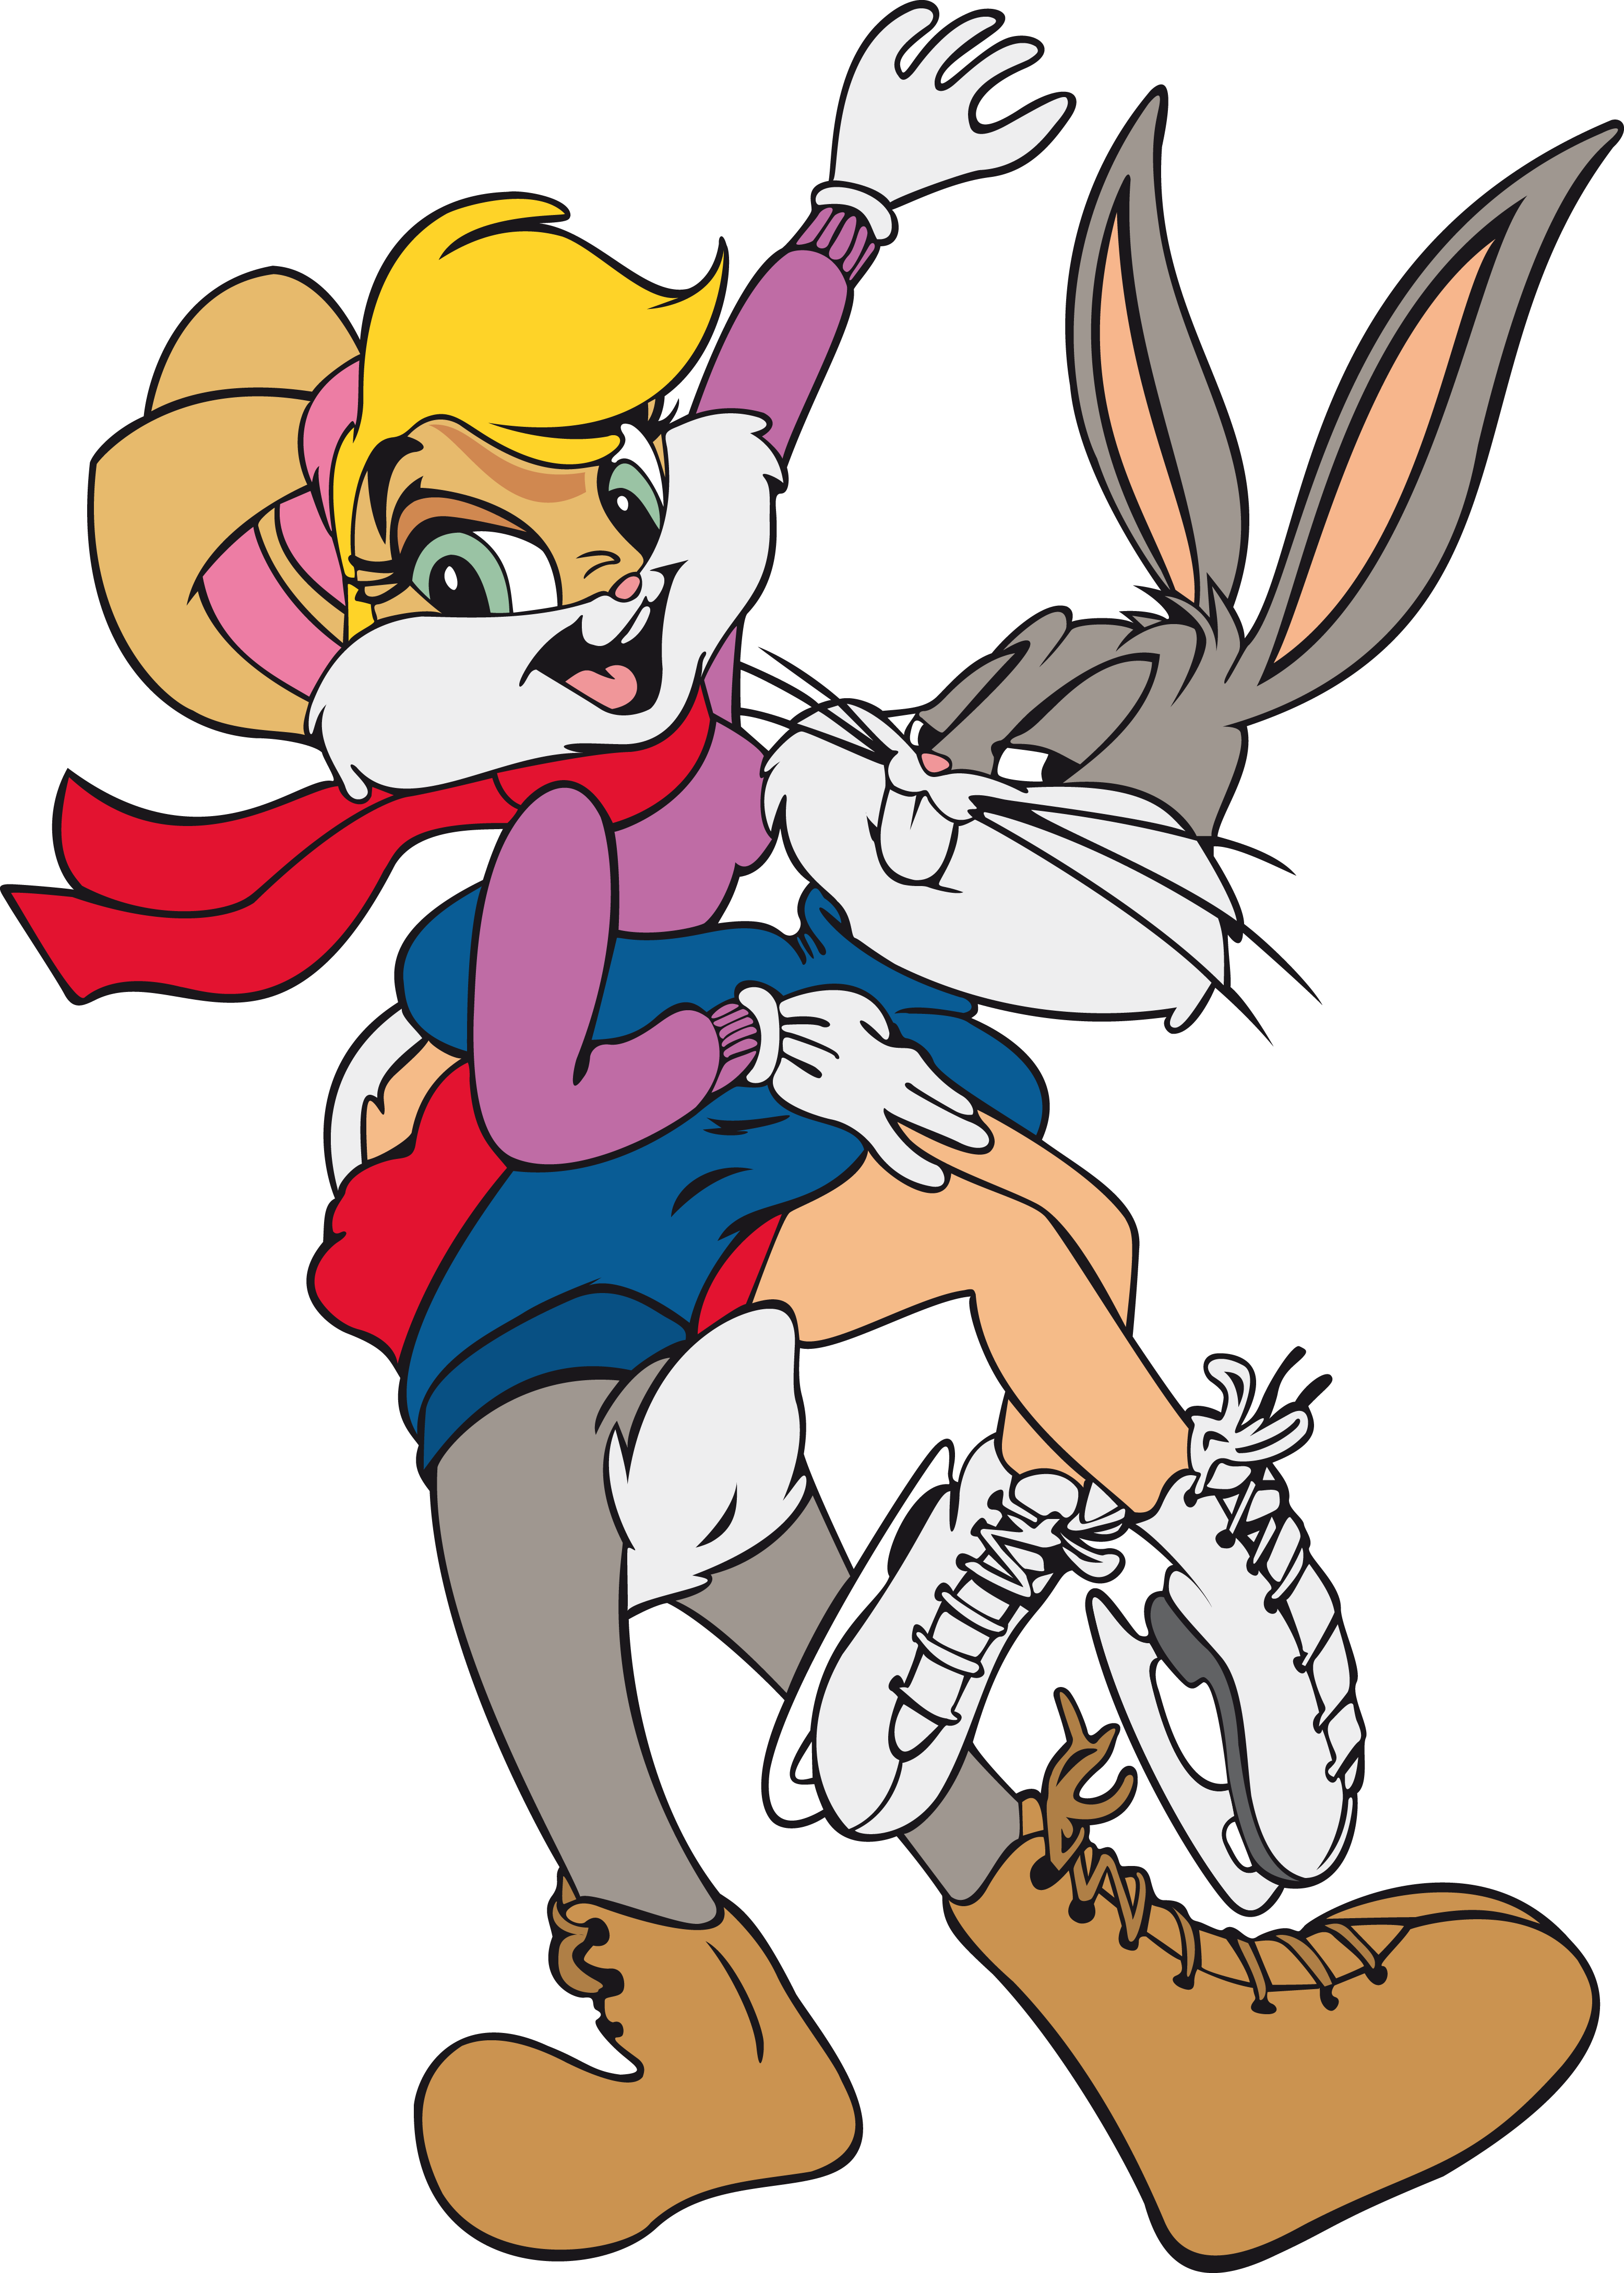 share clipart about Lola Bunny Lola Bunny Images Lola Hd Wallpaper And - .....